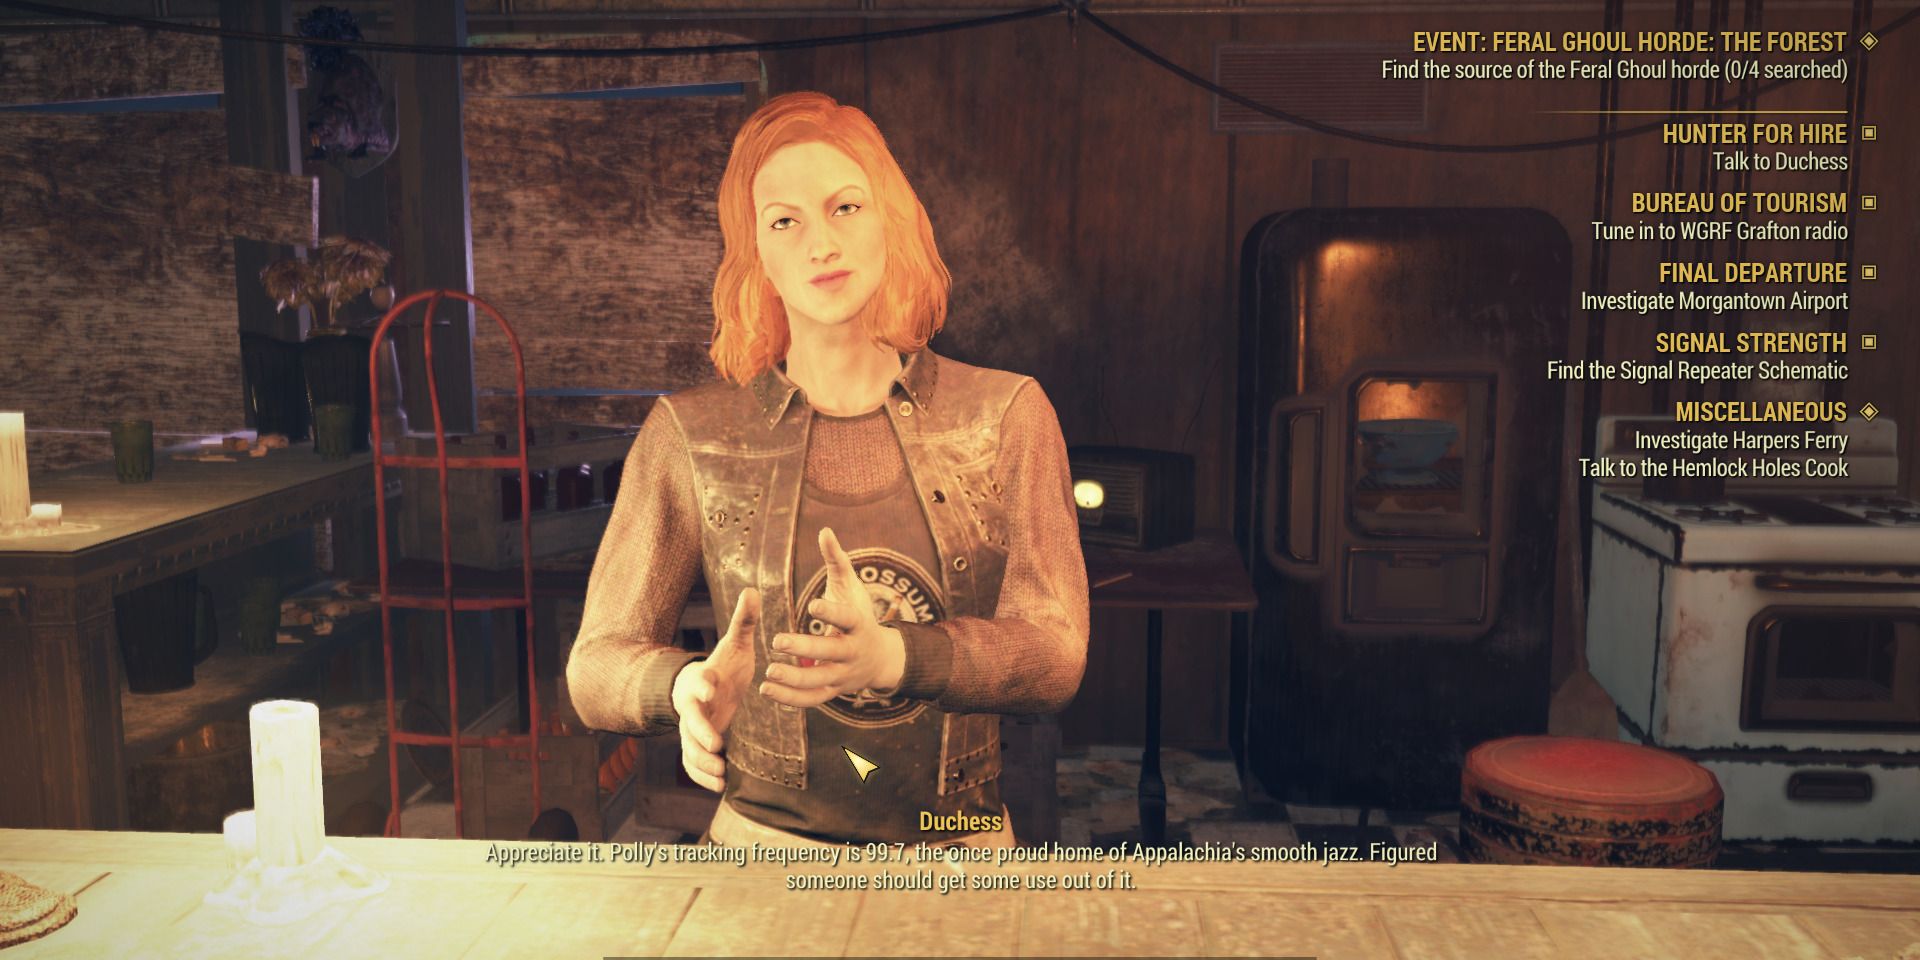 Image of Duchess in the Hunter for Hire quest in Fallout 76